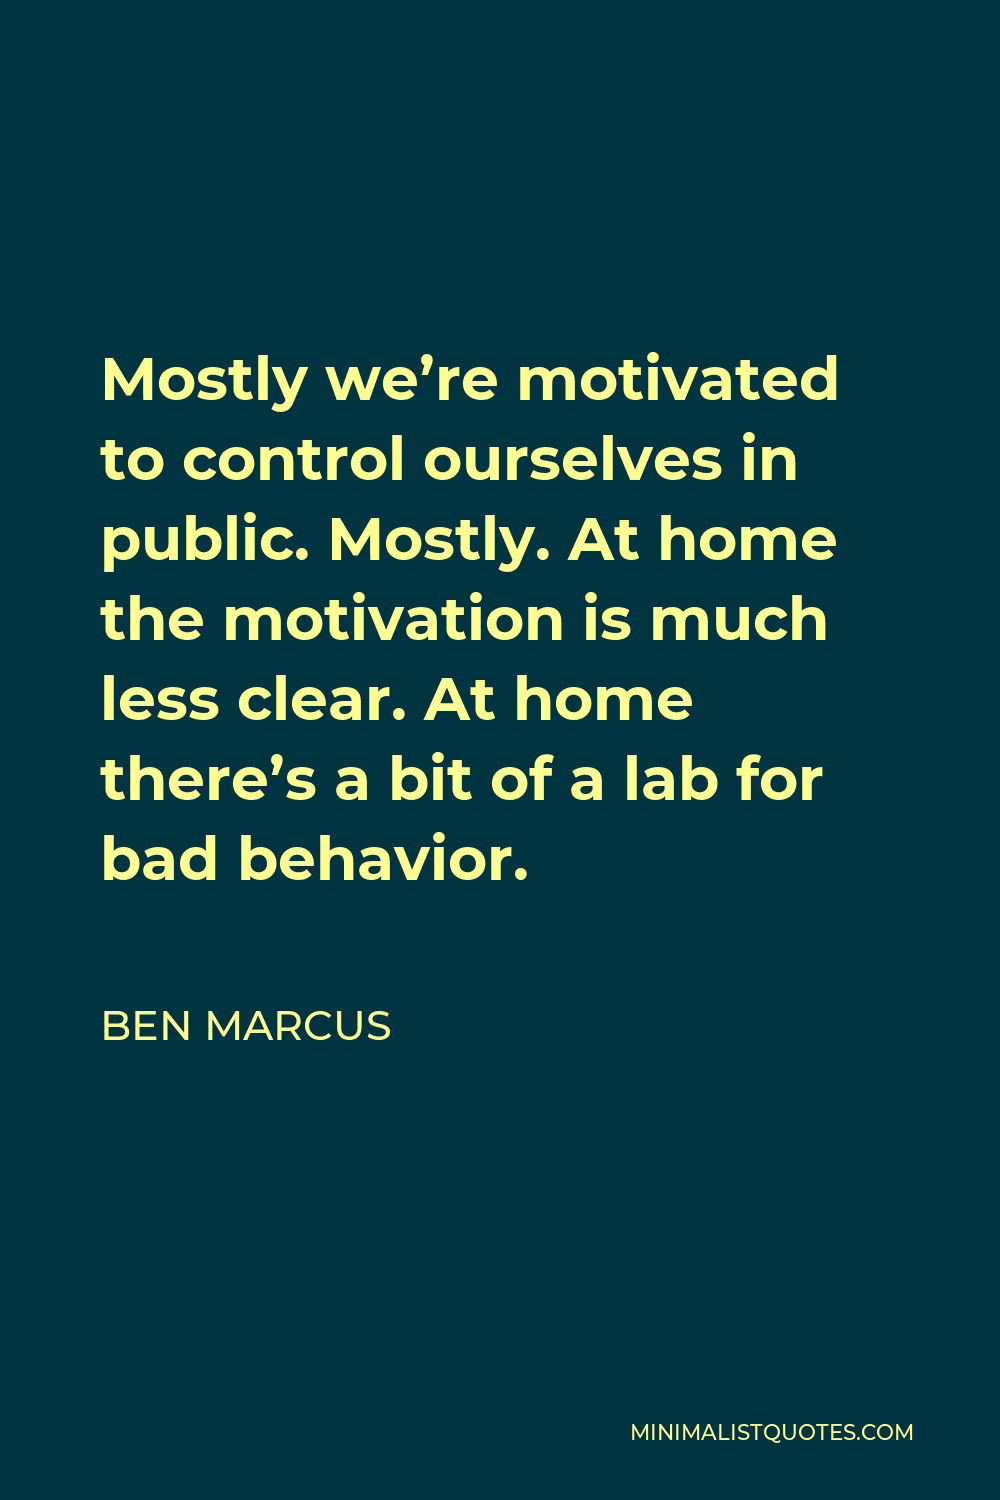 Ben Marcus Quote - Mostly we’re motivated to control ourselves in public. Mostly. At home the motivation is much less clear. At home there’s a bit of a lab for bad behavior.